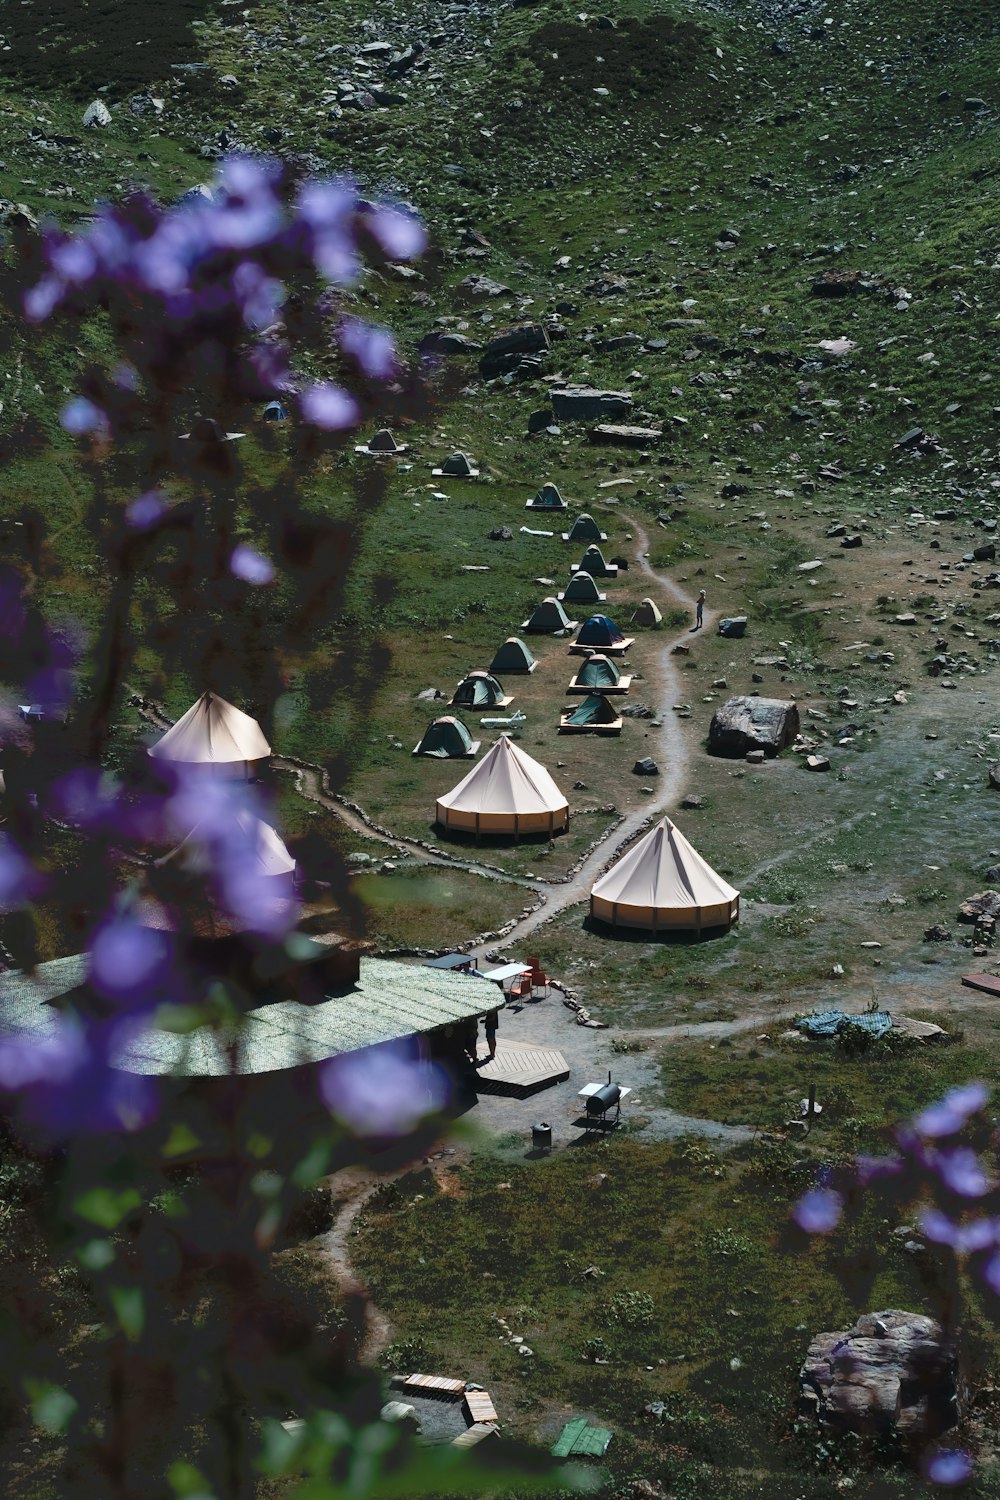 a group of tents in a field